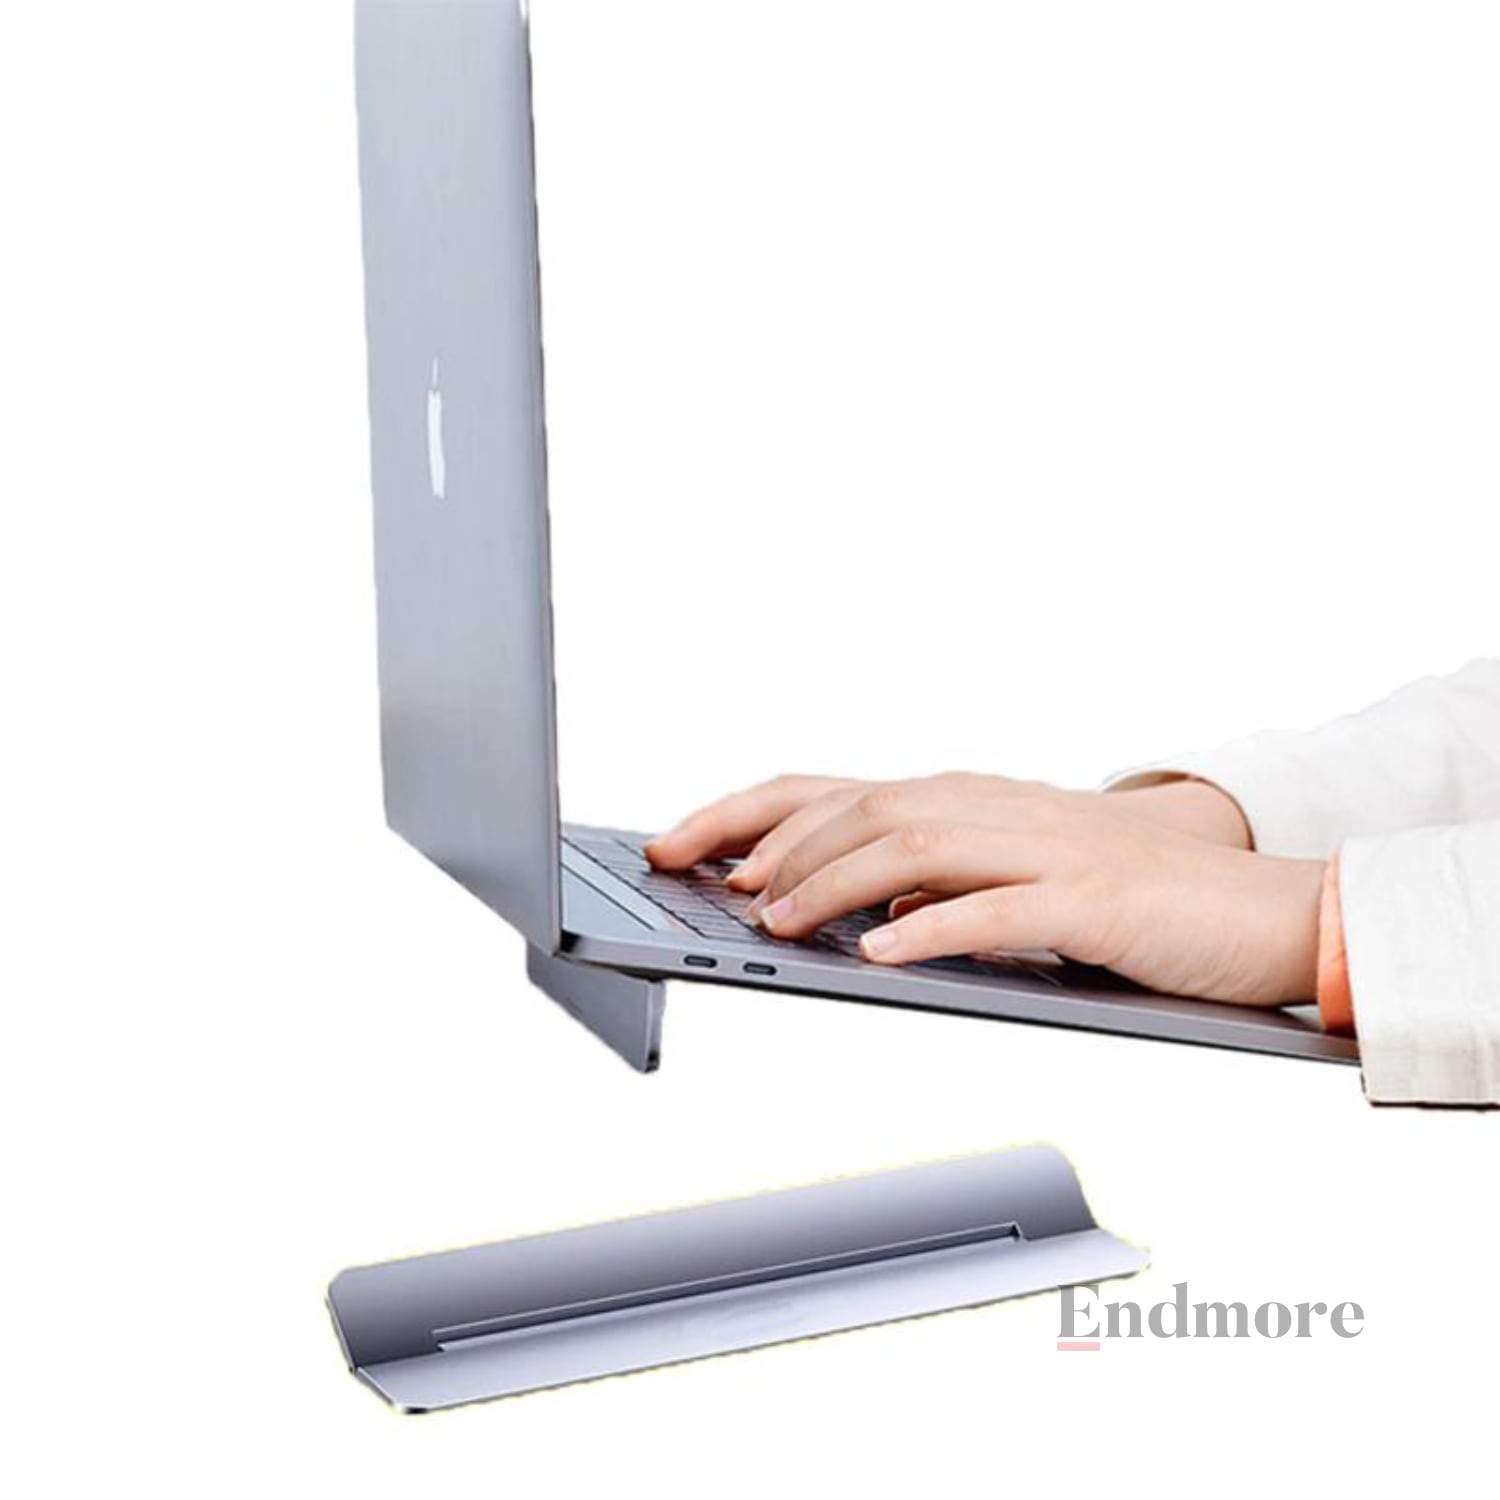 Foldable Ultra Portable Aluminum Laptop Stand for 11/13/17in Macbook Accessories Endmore. | A Life Well Designed. 